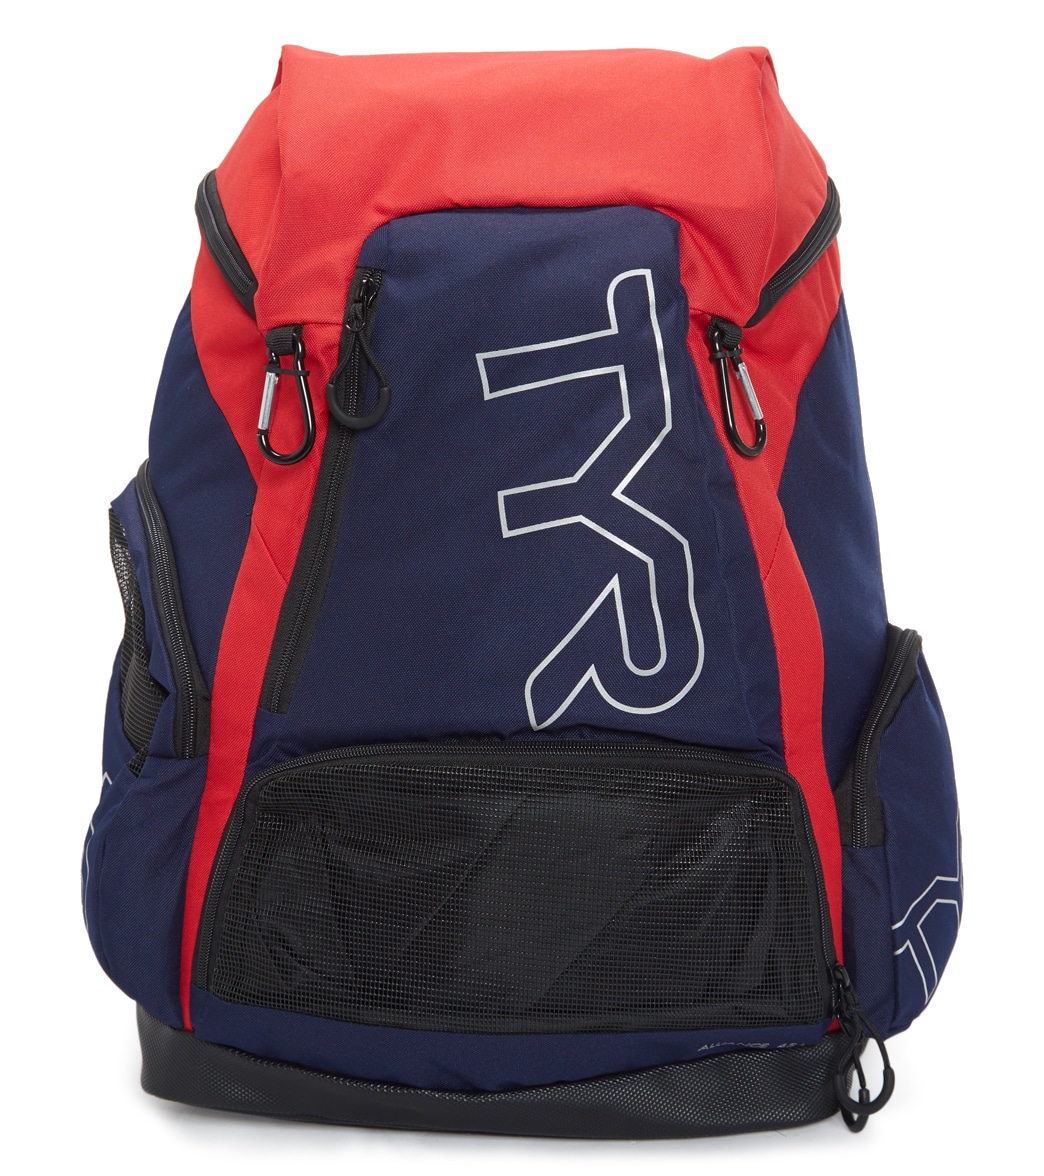 TYR Alliance 45L Backpack - Navy/Red Nylon - Swimoutlet.com